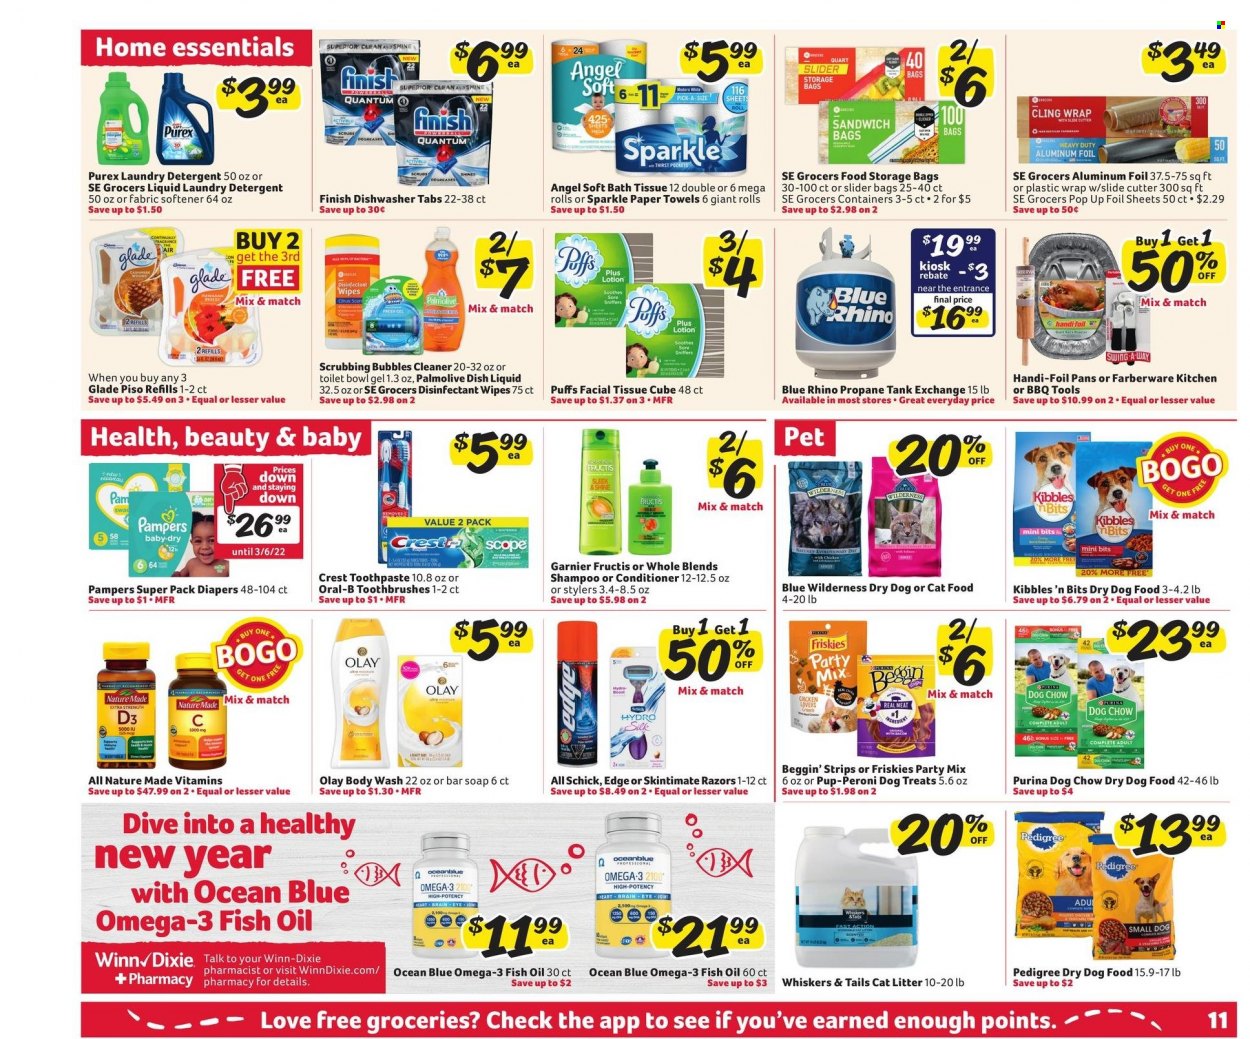 thumbnail - Winn Dixie Flyer - 01/19/2022 - 01/25/2022 - Sales products - puffs, Silk, strips, wipes, Pampers, nappies, bath tissue, kitchen towels, paper towels, detergent, Scrubbing Bubbles, cleaner, desinfection, fabric softener, laundry detergent, Purex, dishwashing liquid, body wash, shampoo, Palmolive, soap bar, soap, Oral-B, toothpaste, Crest, Garnier, Olay, conditioner, Fructis, Schick, bag, storage bag, aluminium foil, cutter, Glade, cat litter, tank, animal food, cat food, dog food, Dog Chow, Purina, Pedigree, dry dog food, Pup-Peroni, Beggin', Friskies, Blue Wilderness, fish oil, Nature Made, Omega-3, vitamin D3. Page 14.